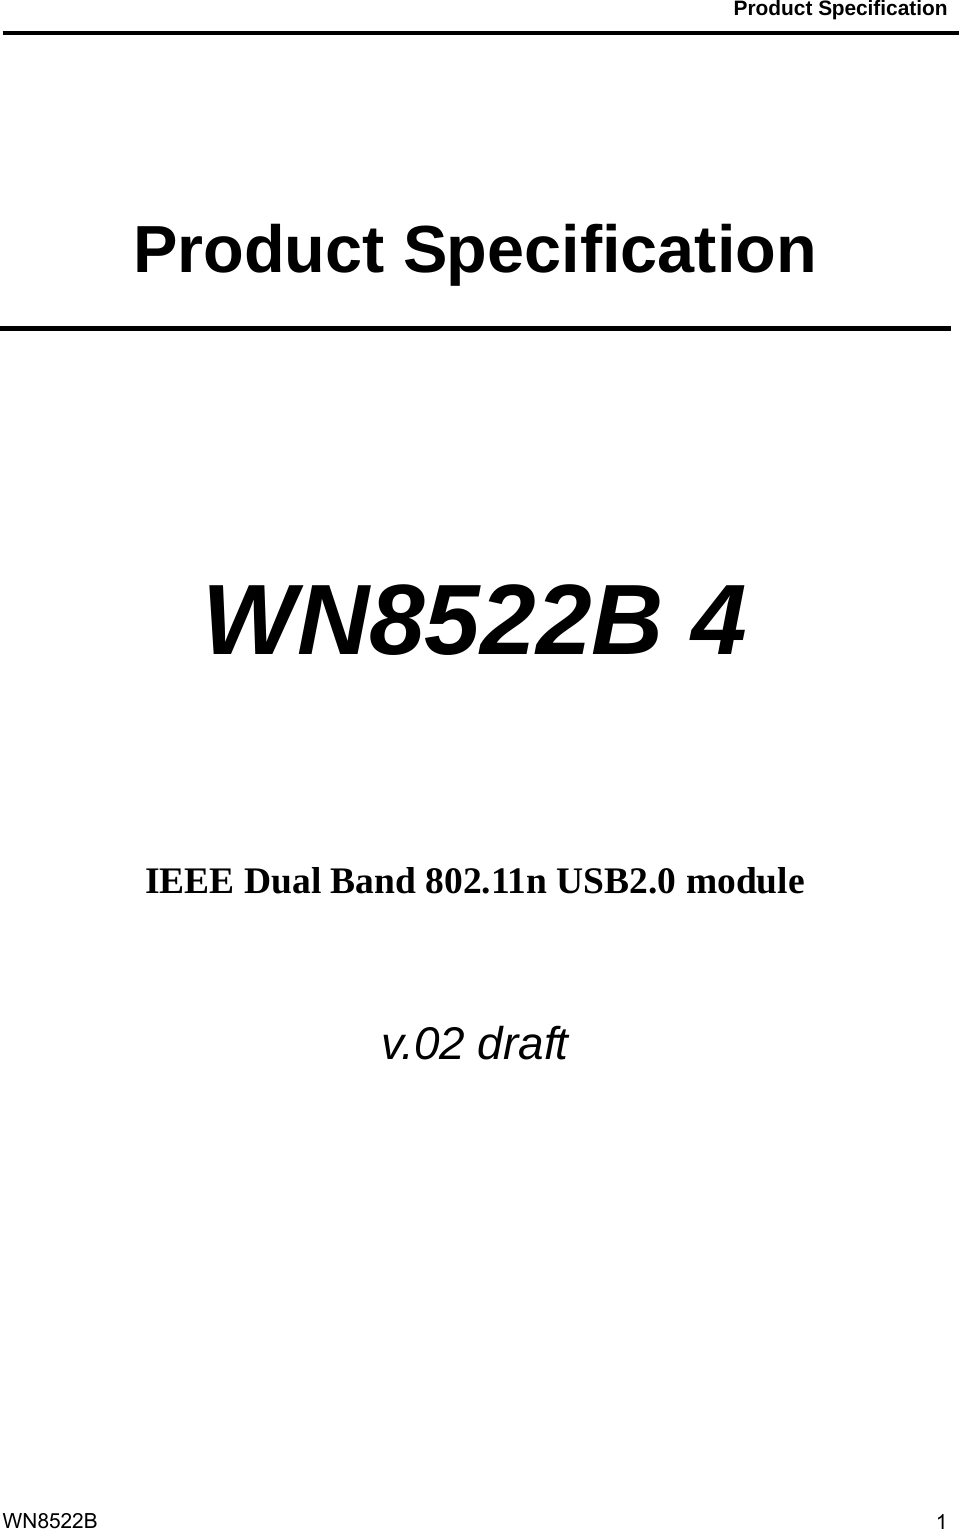                                           Product Specification                                              WN8522B  1 Product Specification   WN8522B 4     IEEE Dual Band 802.11n USB2.0 module  v.02 draft    